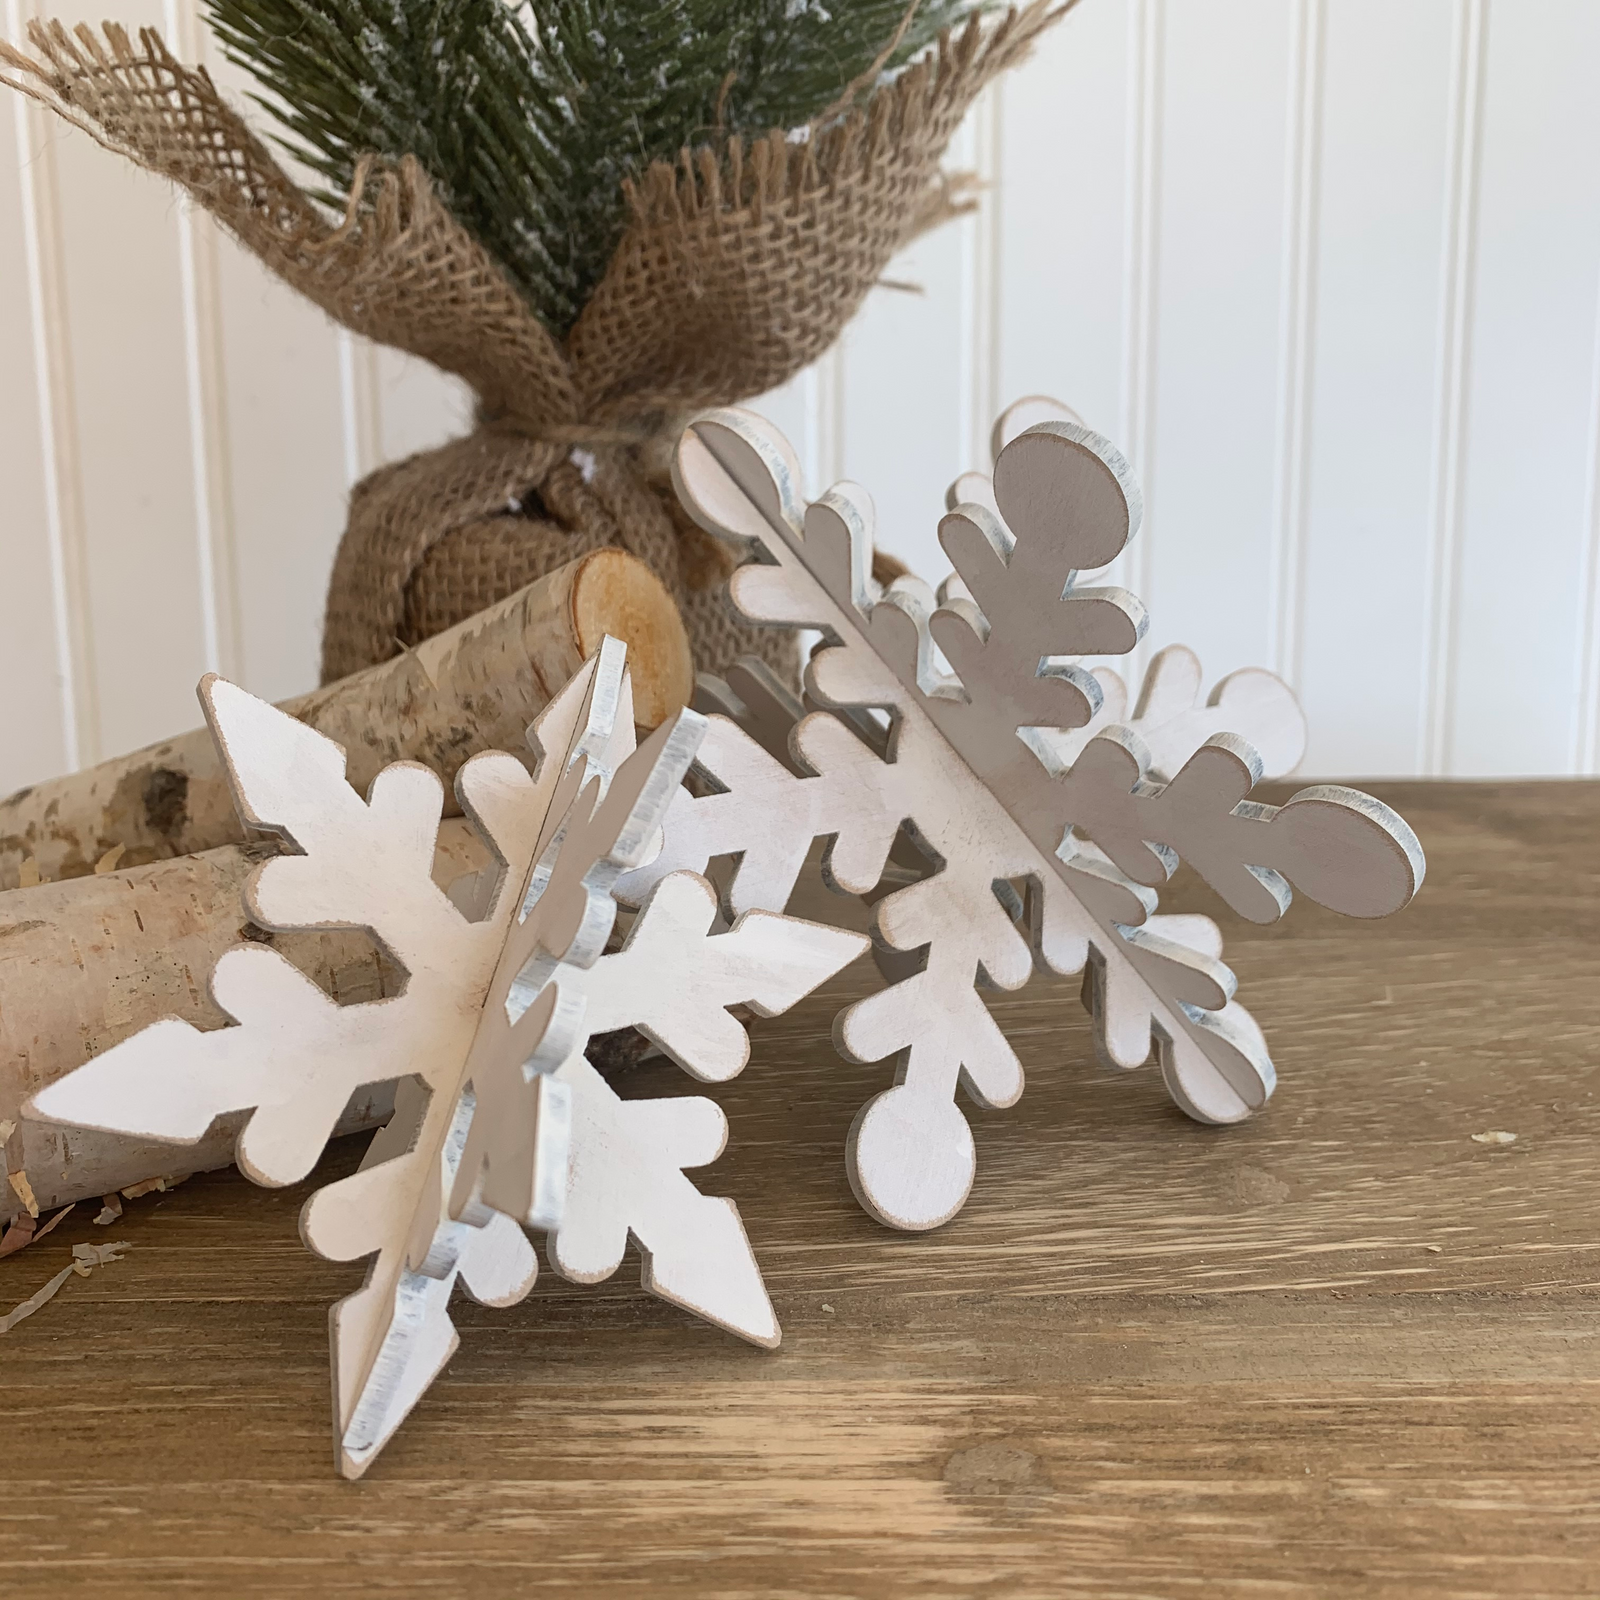 Winter and Spring Seasonal Shapes-Unfinshed wood shapes for crafting a -  Paisleys and Polka Dots